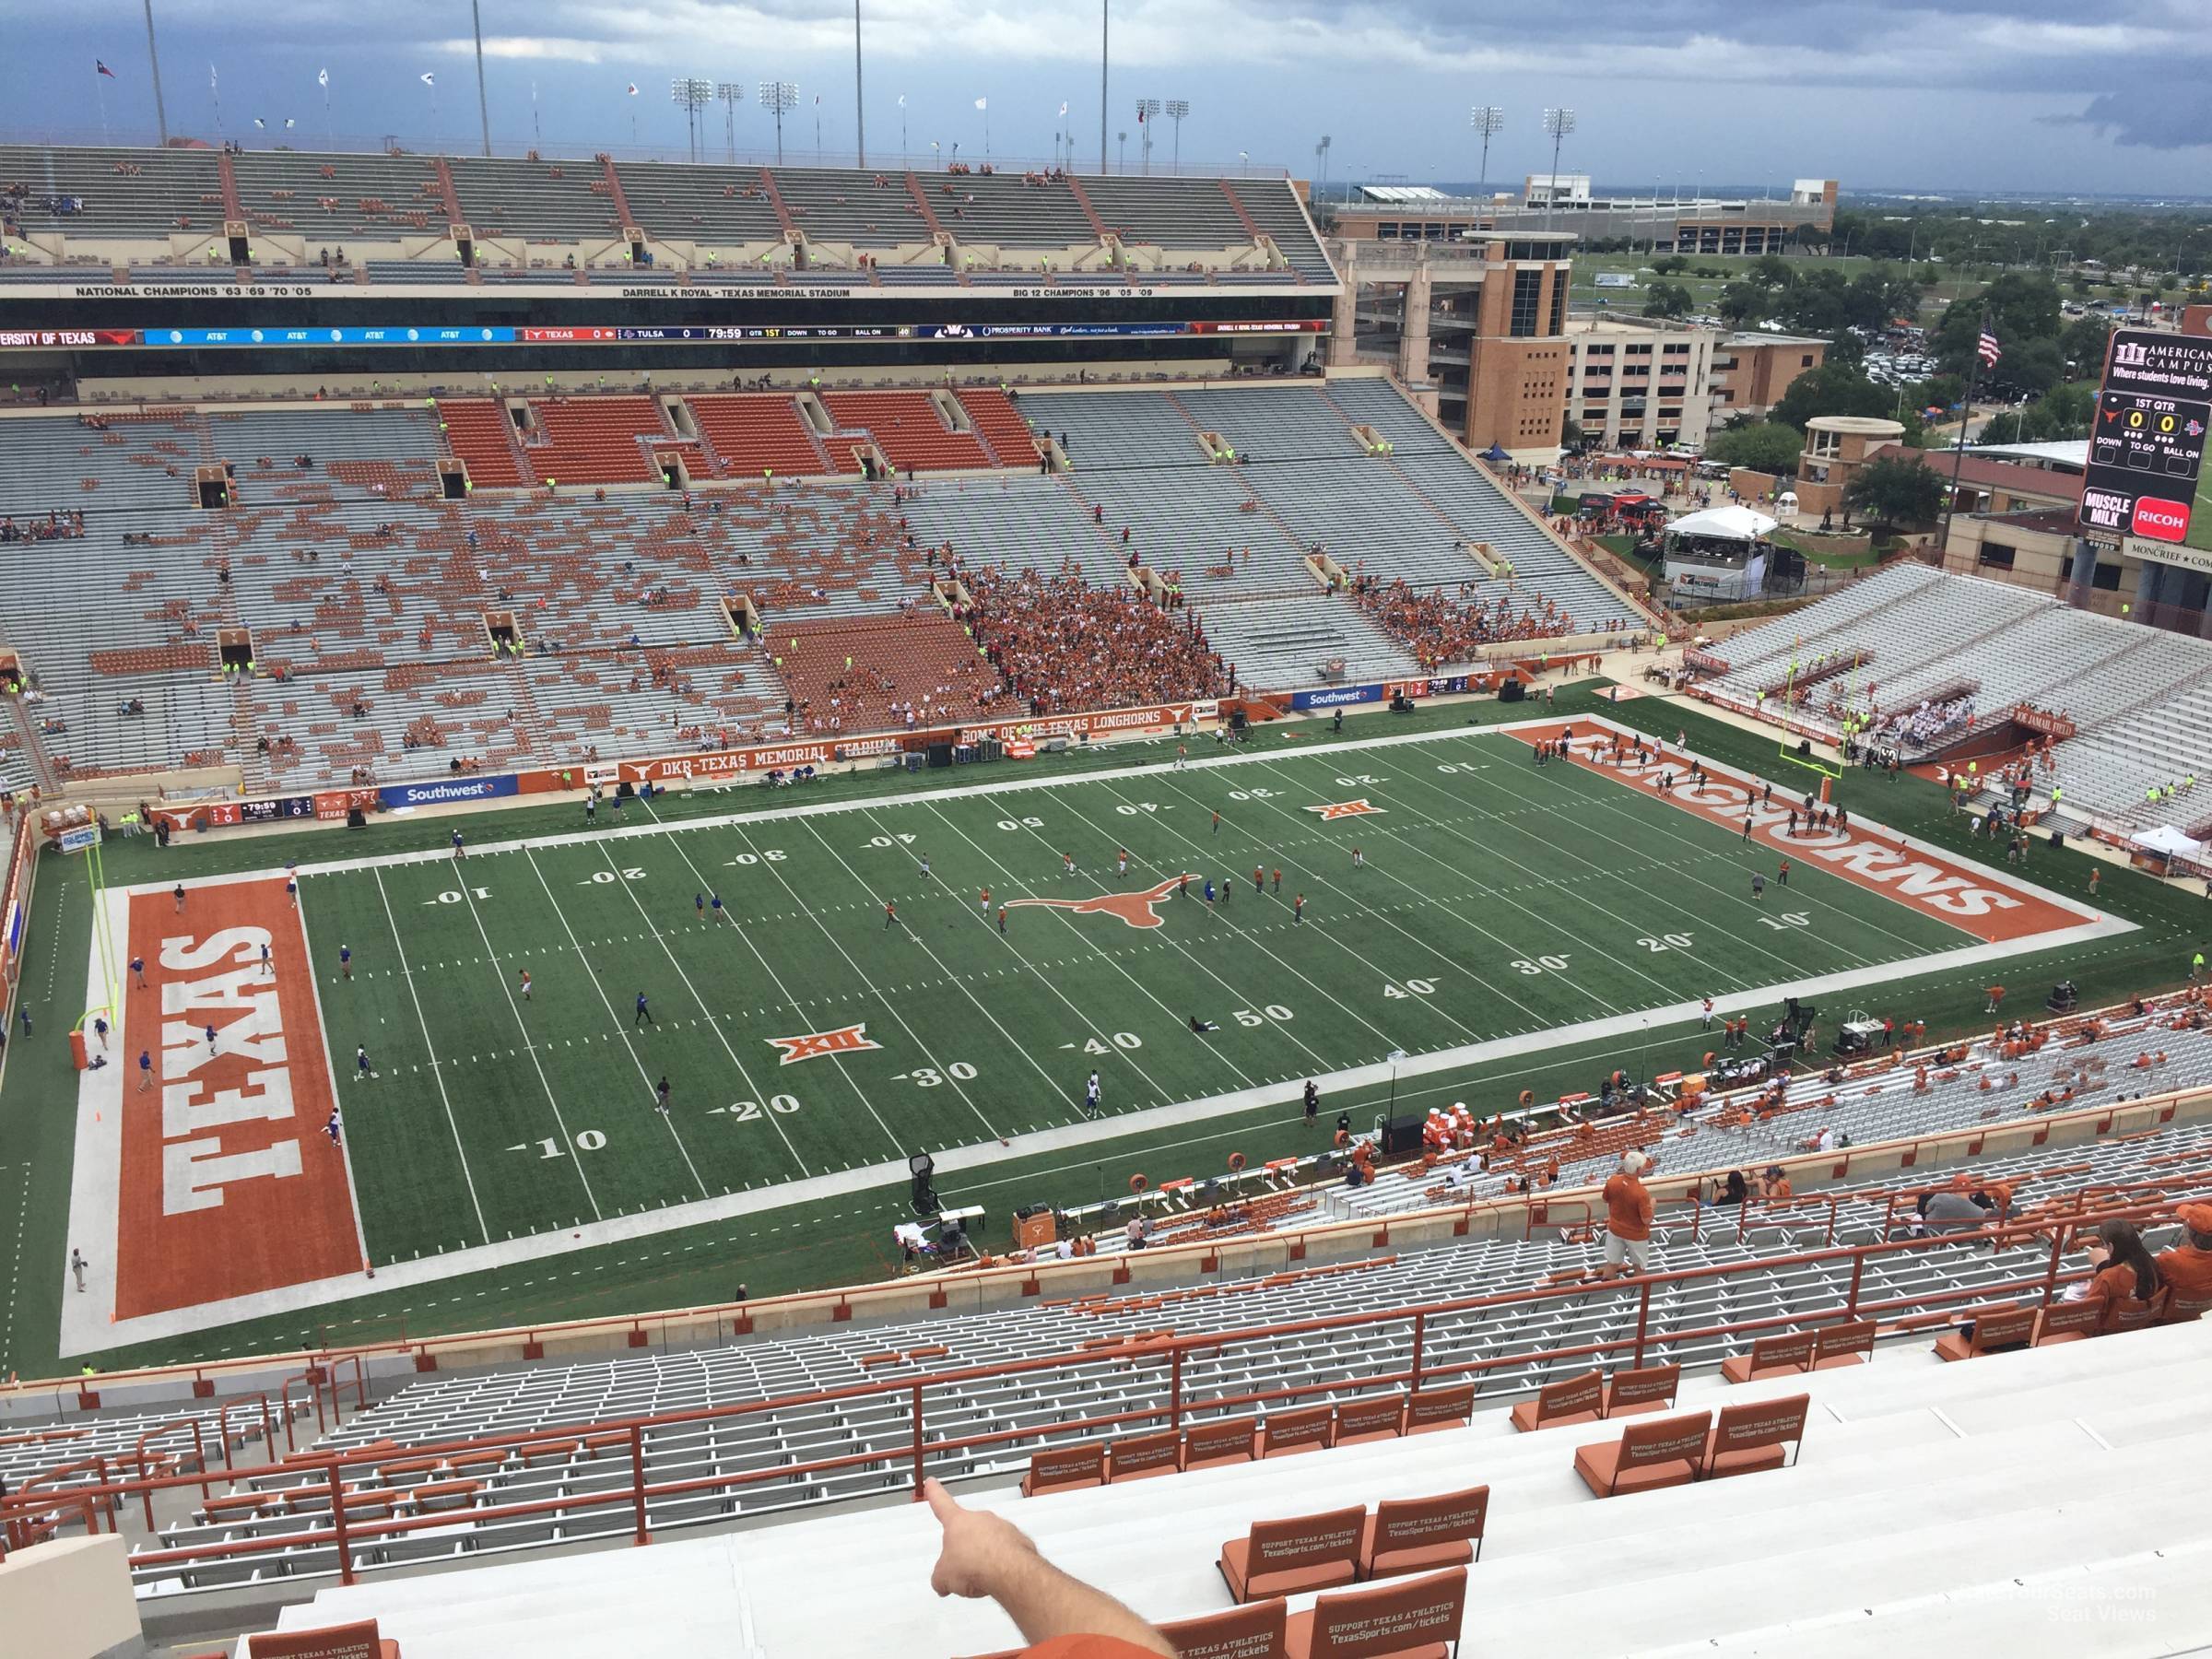 section 107, row 30 seat view  - dkr-texas memorial stadium